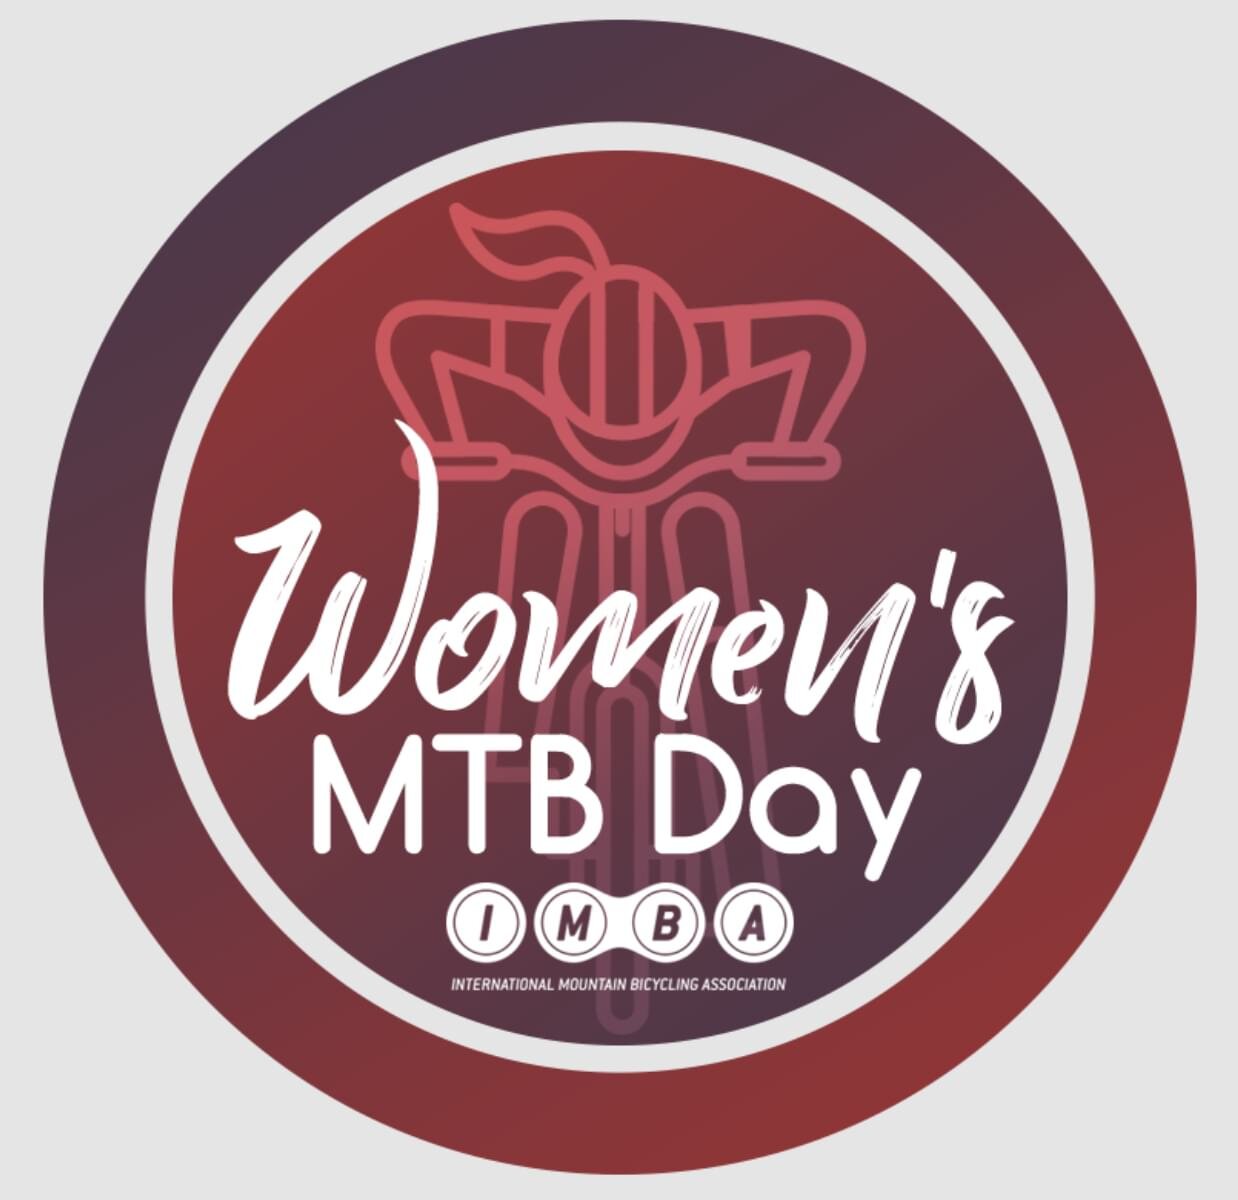 ✨Happy International Women's Mountain Bike Day!!✨

We celebrated by holding a VERY productive Volunteer Trail Day - thank you for all the help!!! 

A women's multilevel mountain bike group ride is in the works for this summer - stay tuned for more de